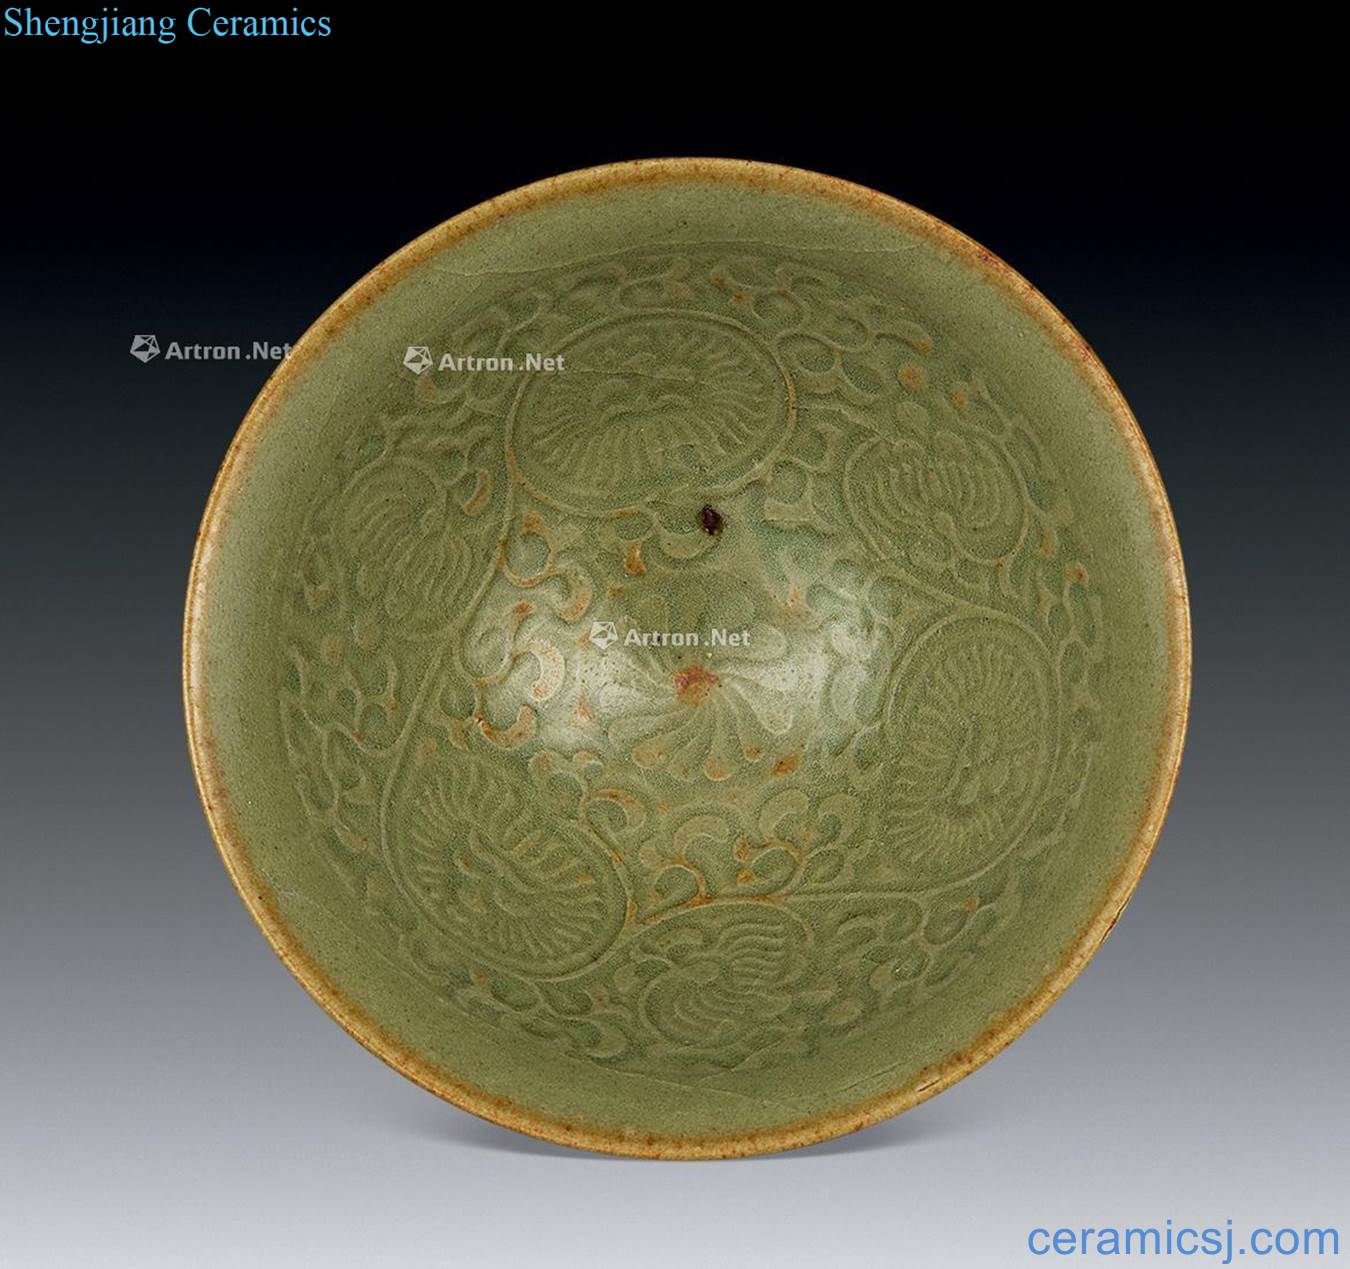 The song dynasty Yao state chrysanthemums bowl